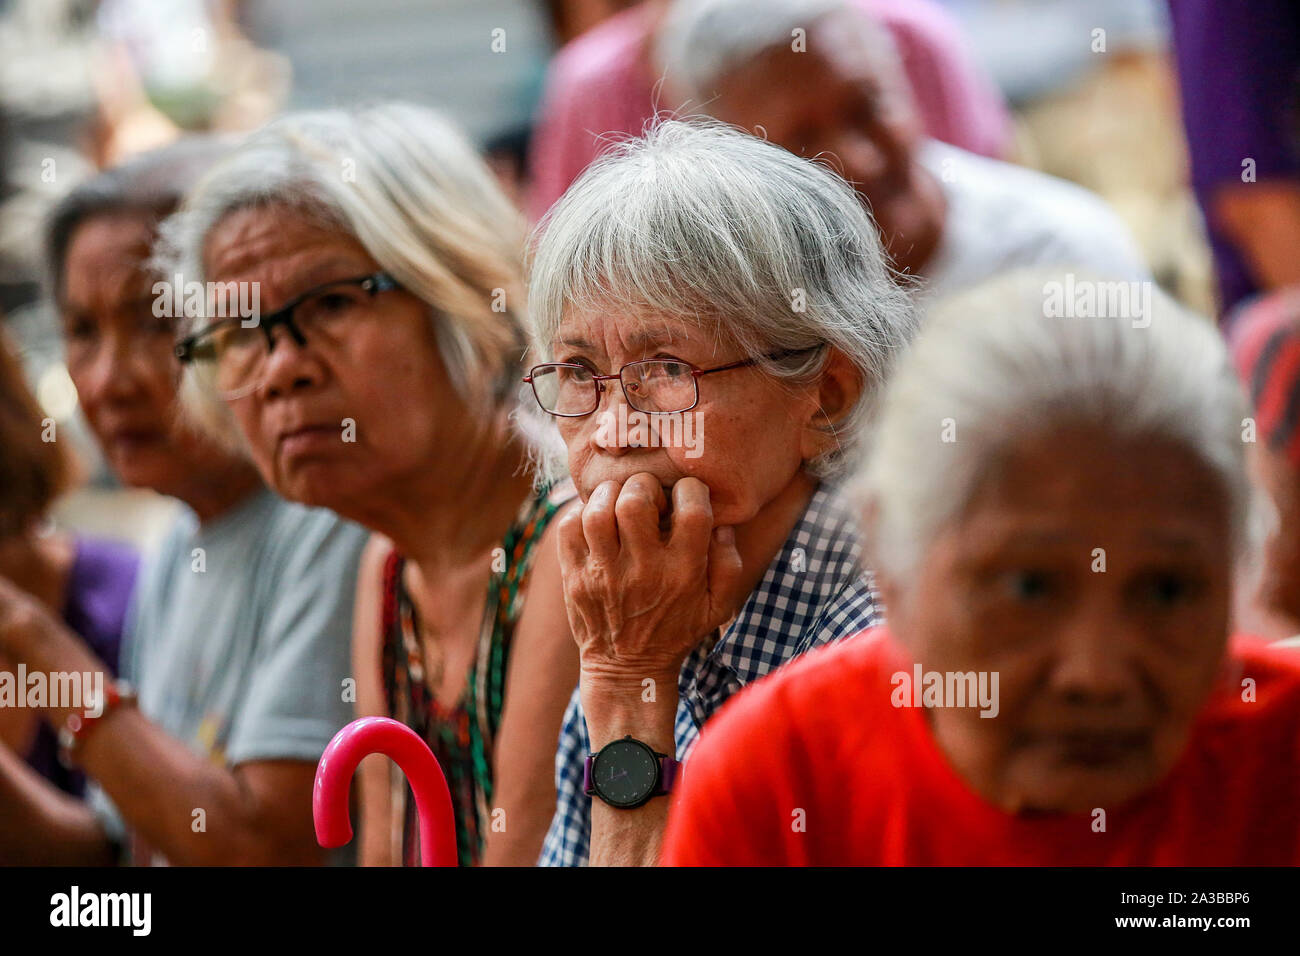 Manila, Philippines. 7th Oct, 2019. Elderly people wait for free vaccines during the mass immunization for senior citizens in Manila, the Philippines, Oct. 7, 2019. The Philippine Department of Health and the local government of Manila vaccinated more than 500 senior citizens against pneumonia and influenza diseases. Credit: Rouelle Umali/Xinhua/Alamy Live News Stock Photo